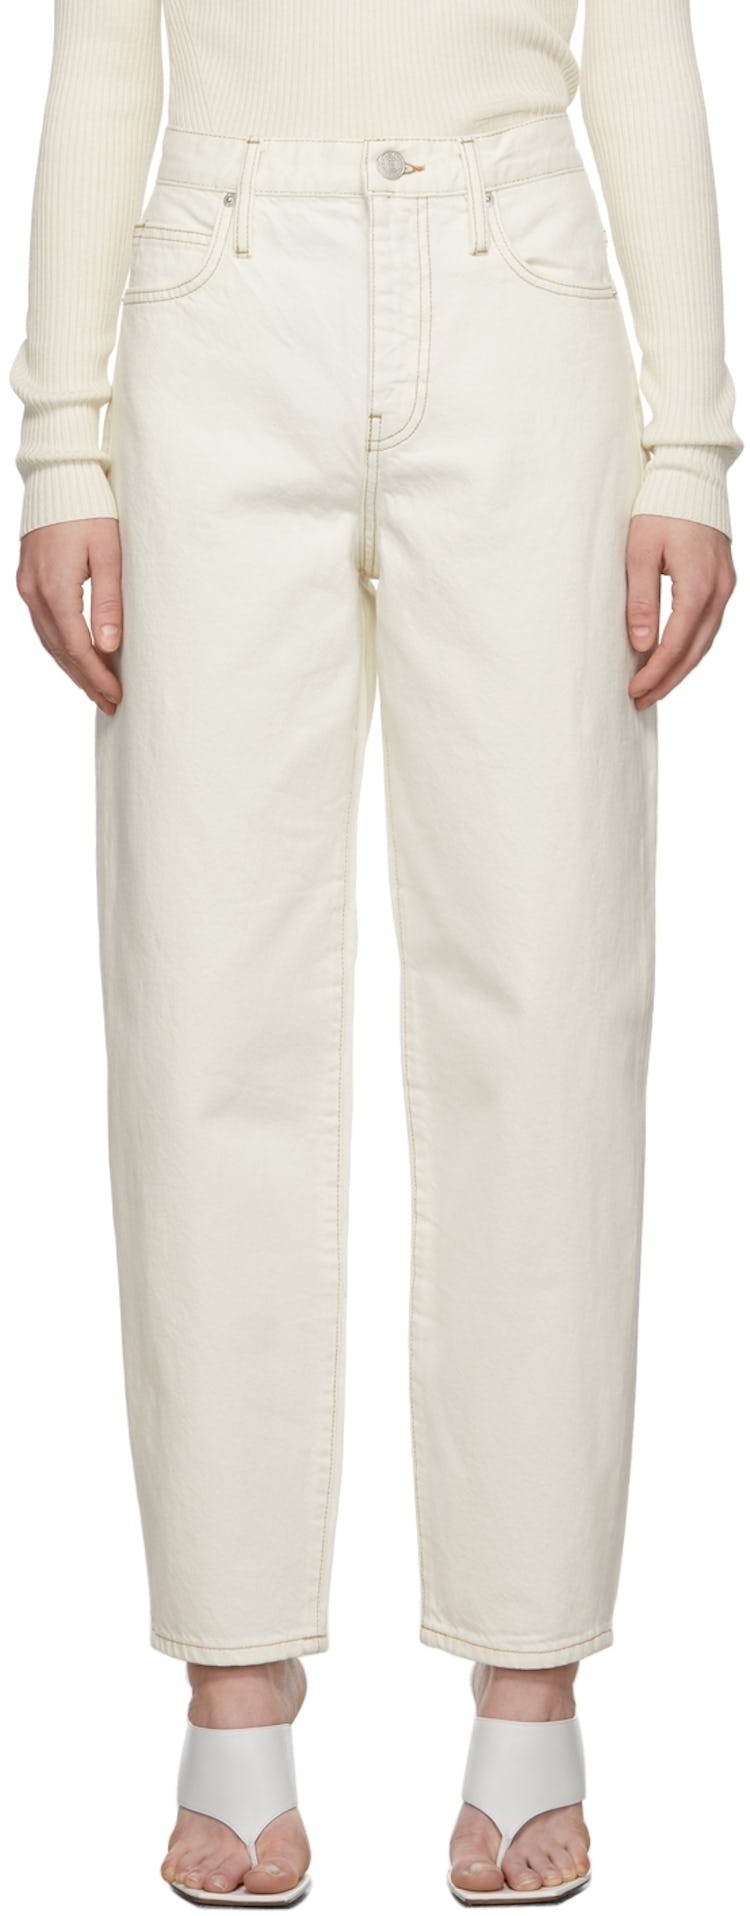 White Ultra High Rise Barrel Jeans: image 1